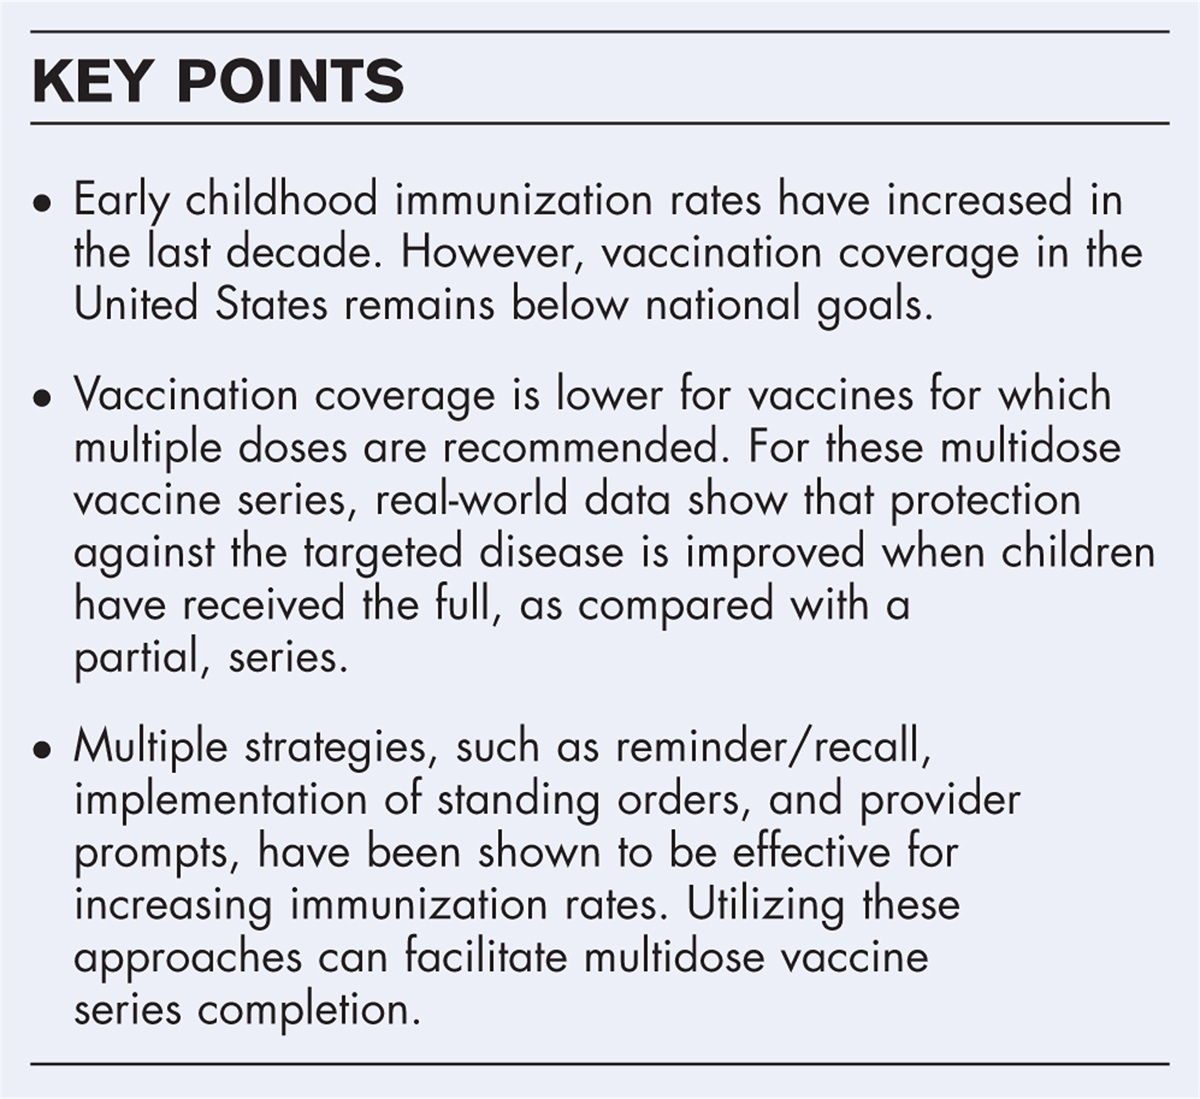 Completion of multidose vaccine series in early childhood: current challenges and opportunities